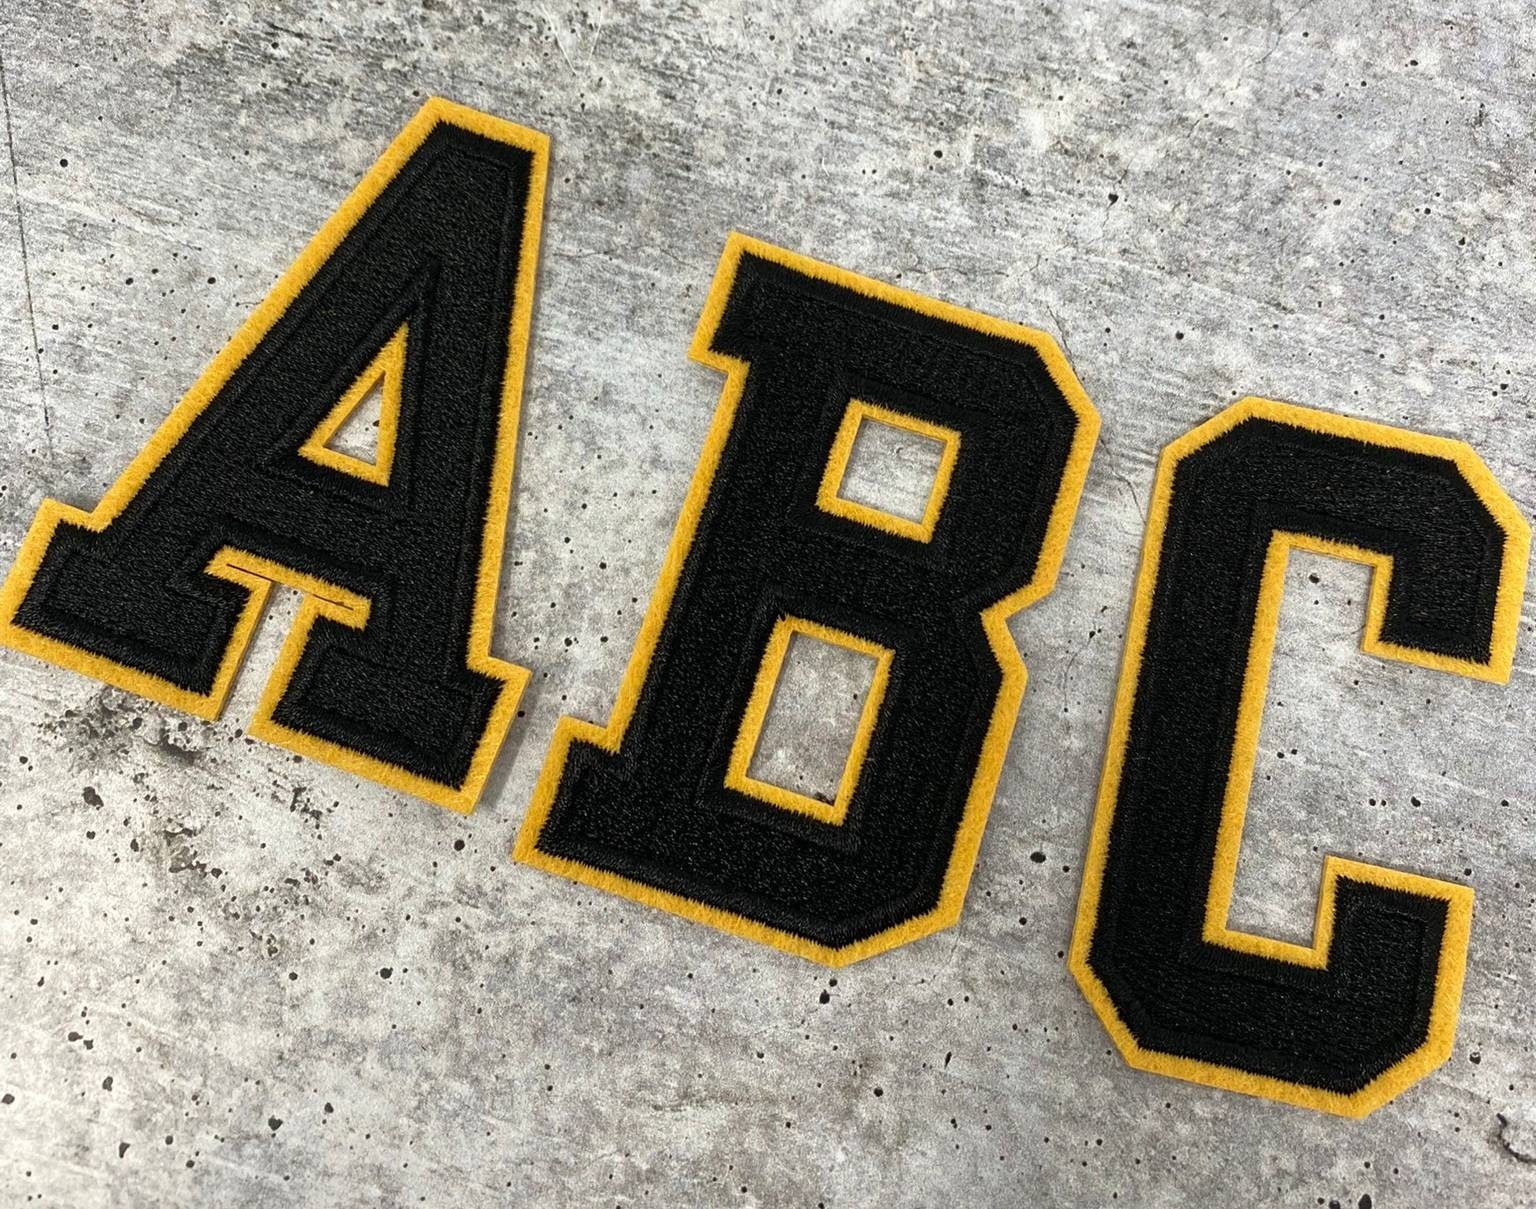 New, Black 3 Embroidered Letter w/GOLD Felt, Varsity Letter Patch, 1-pc,  Iron-on Backing, Choose Your Letter, A-Z Letters, DIY Letters